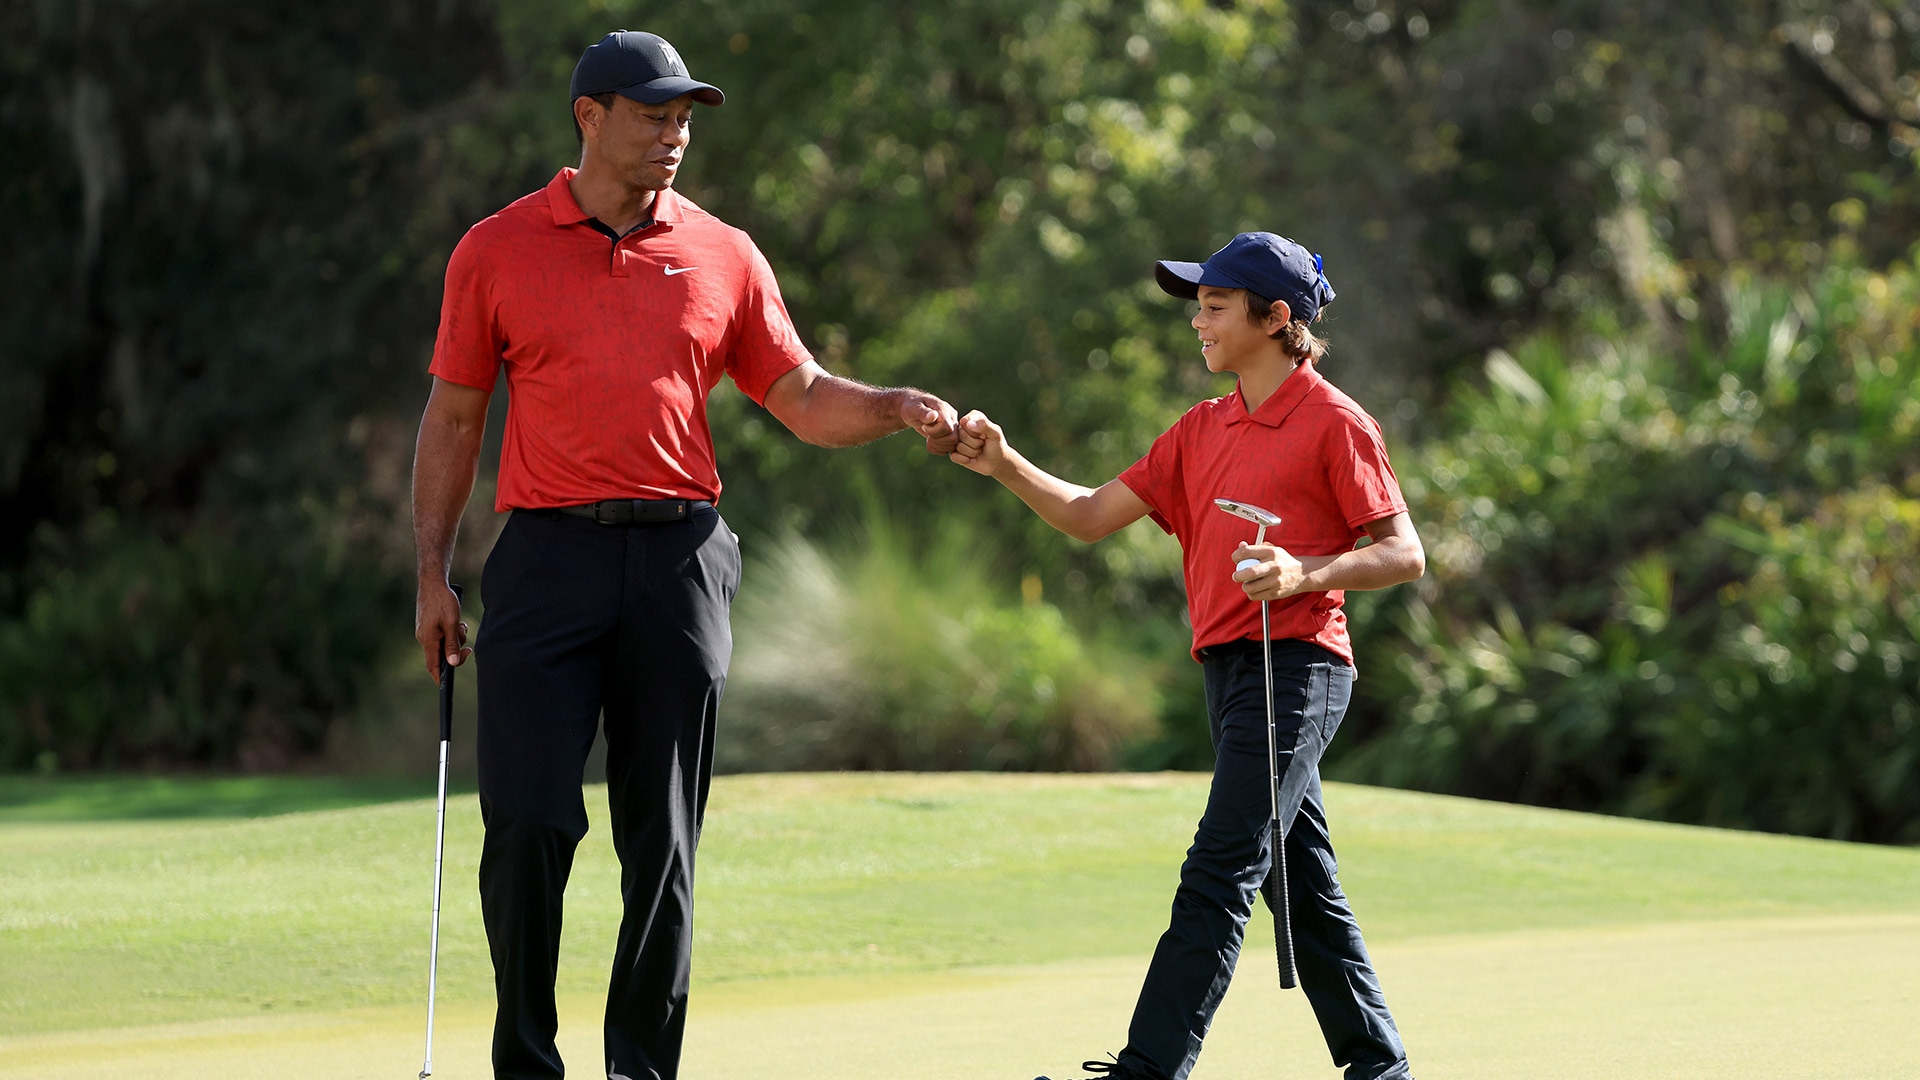 Tiger Woods to team up with son, Charlie, once again at PNC Championship